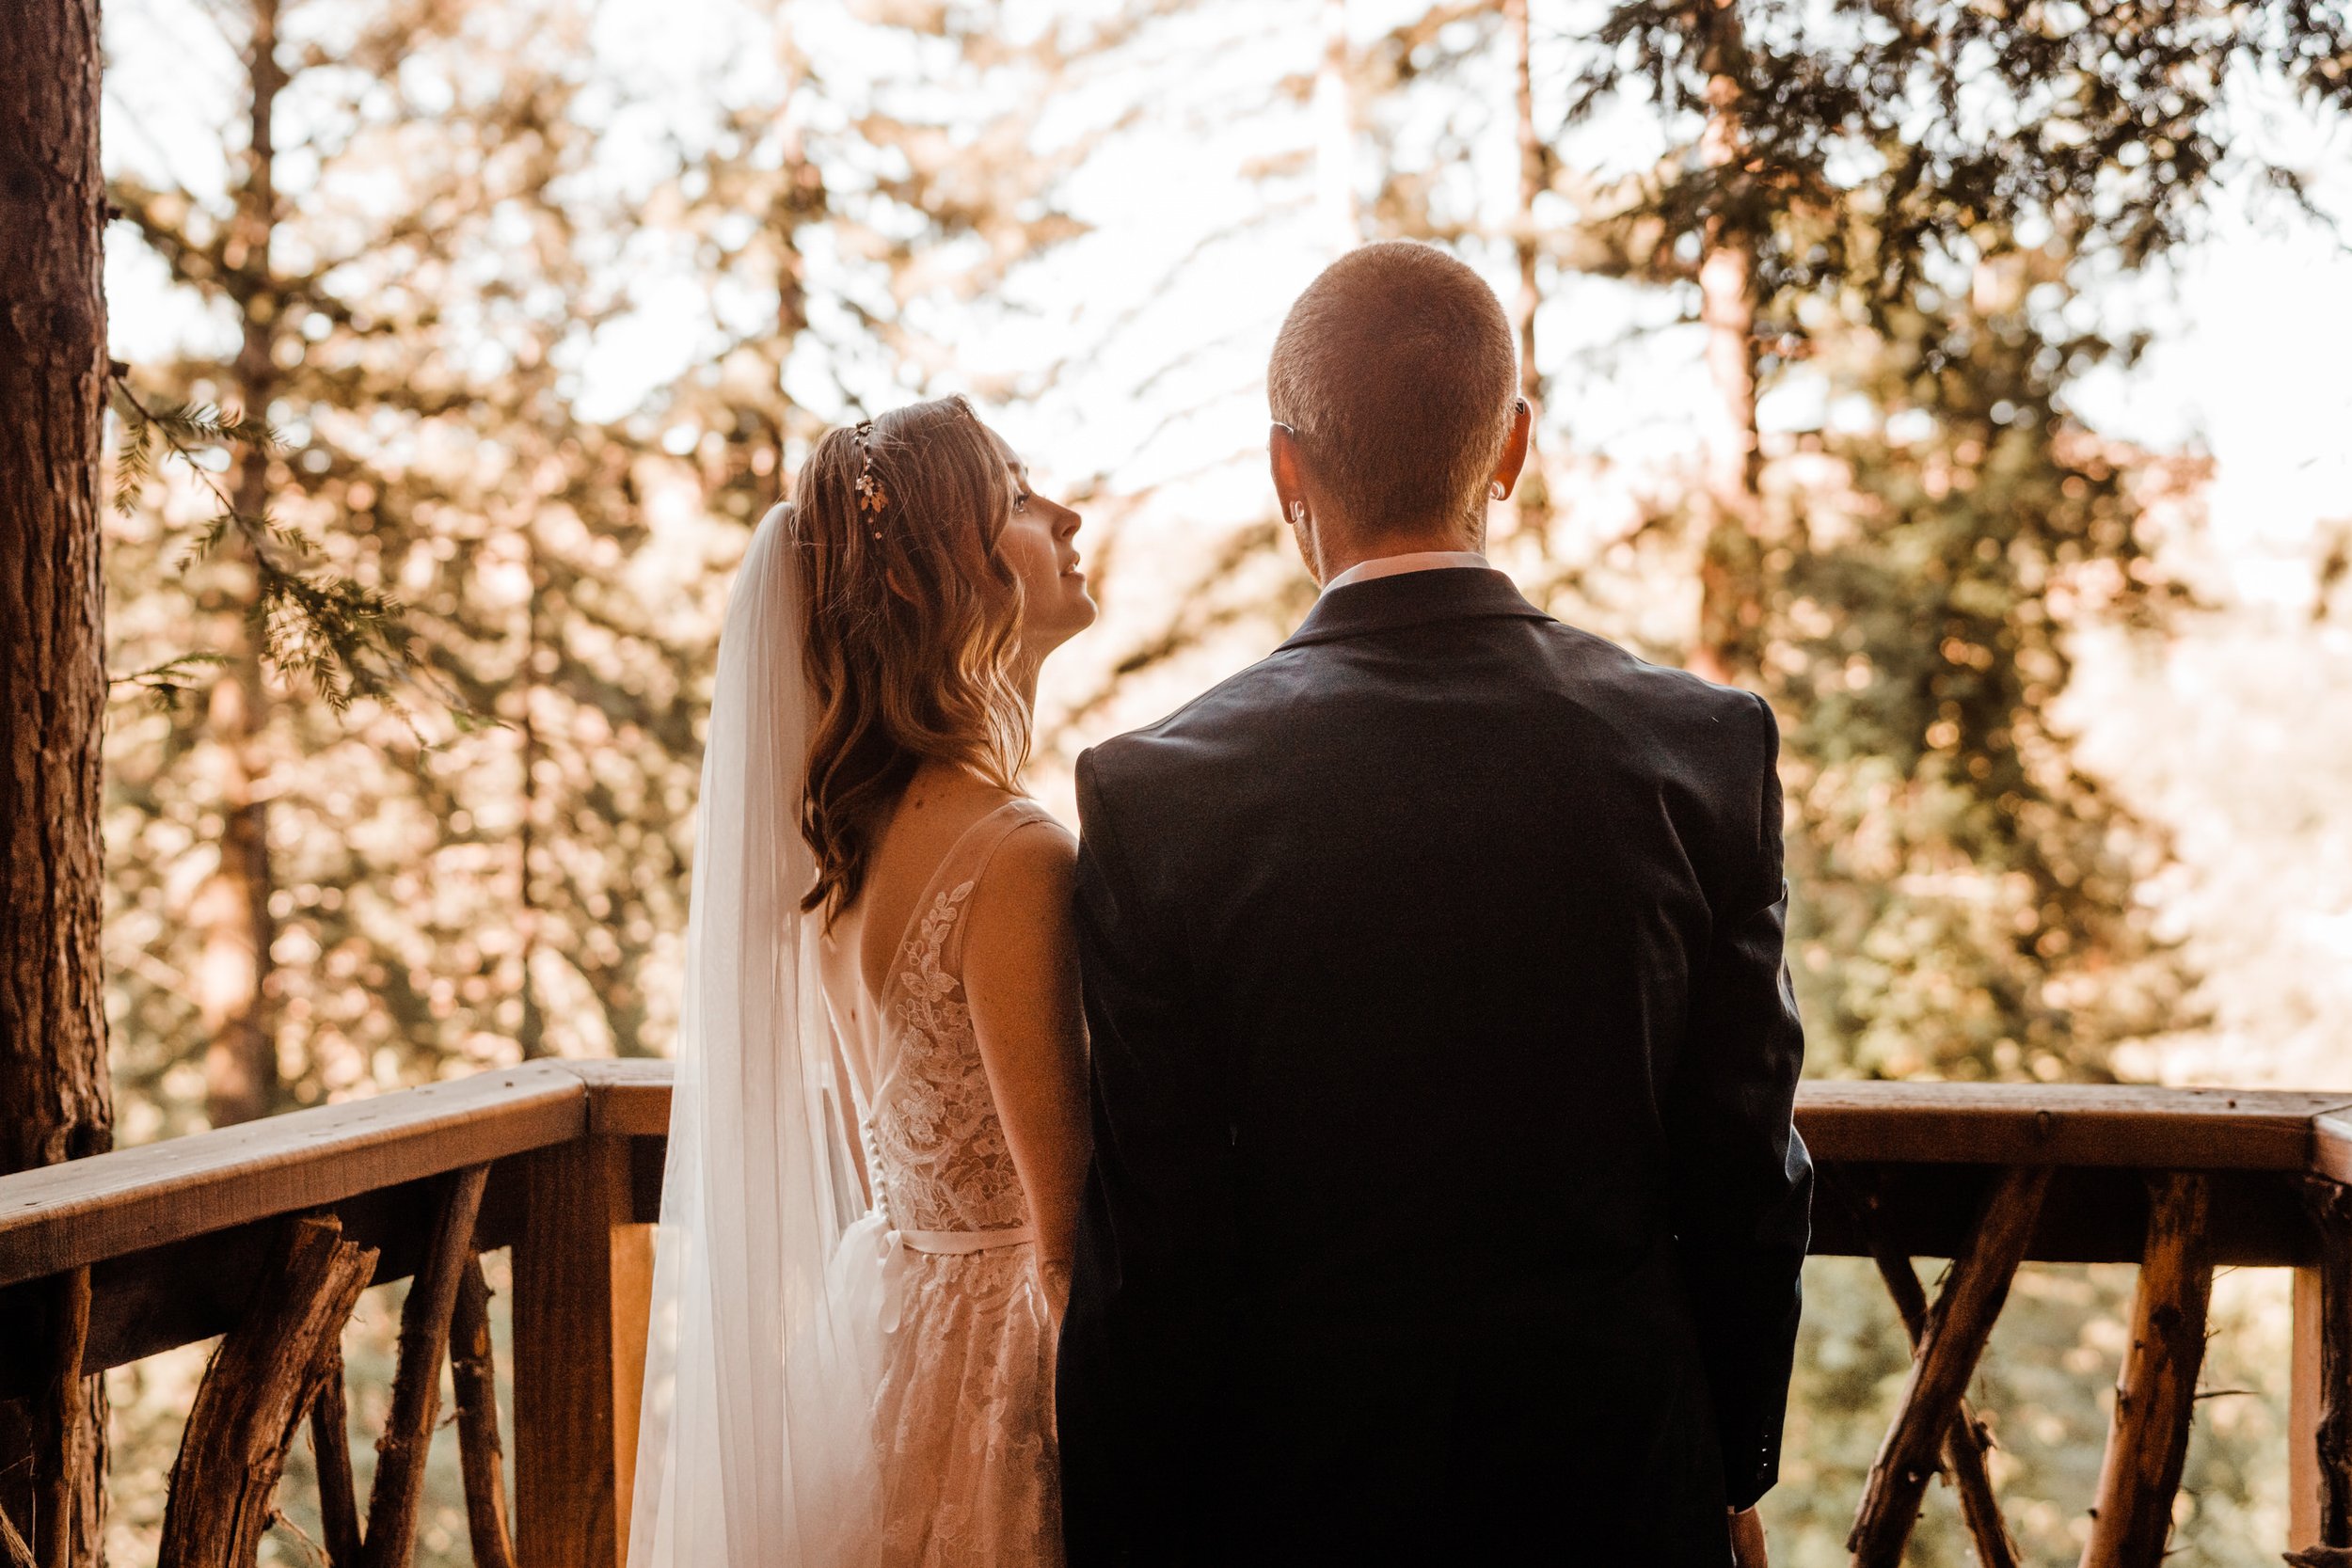 Wedding-in-the-Woods-Bride-and-Groom-Portraits-in-Airbnb-Treehouse (2).jpg